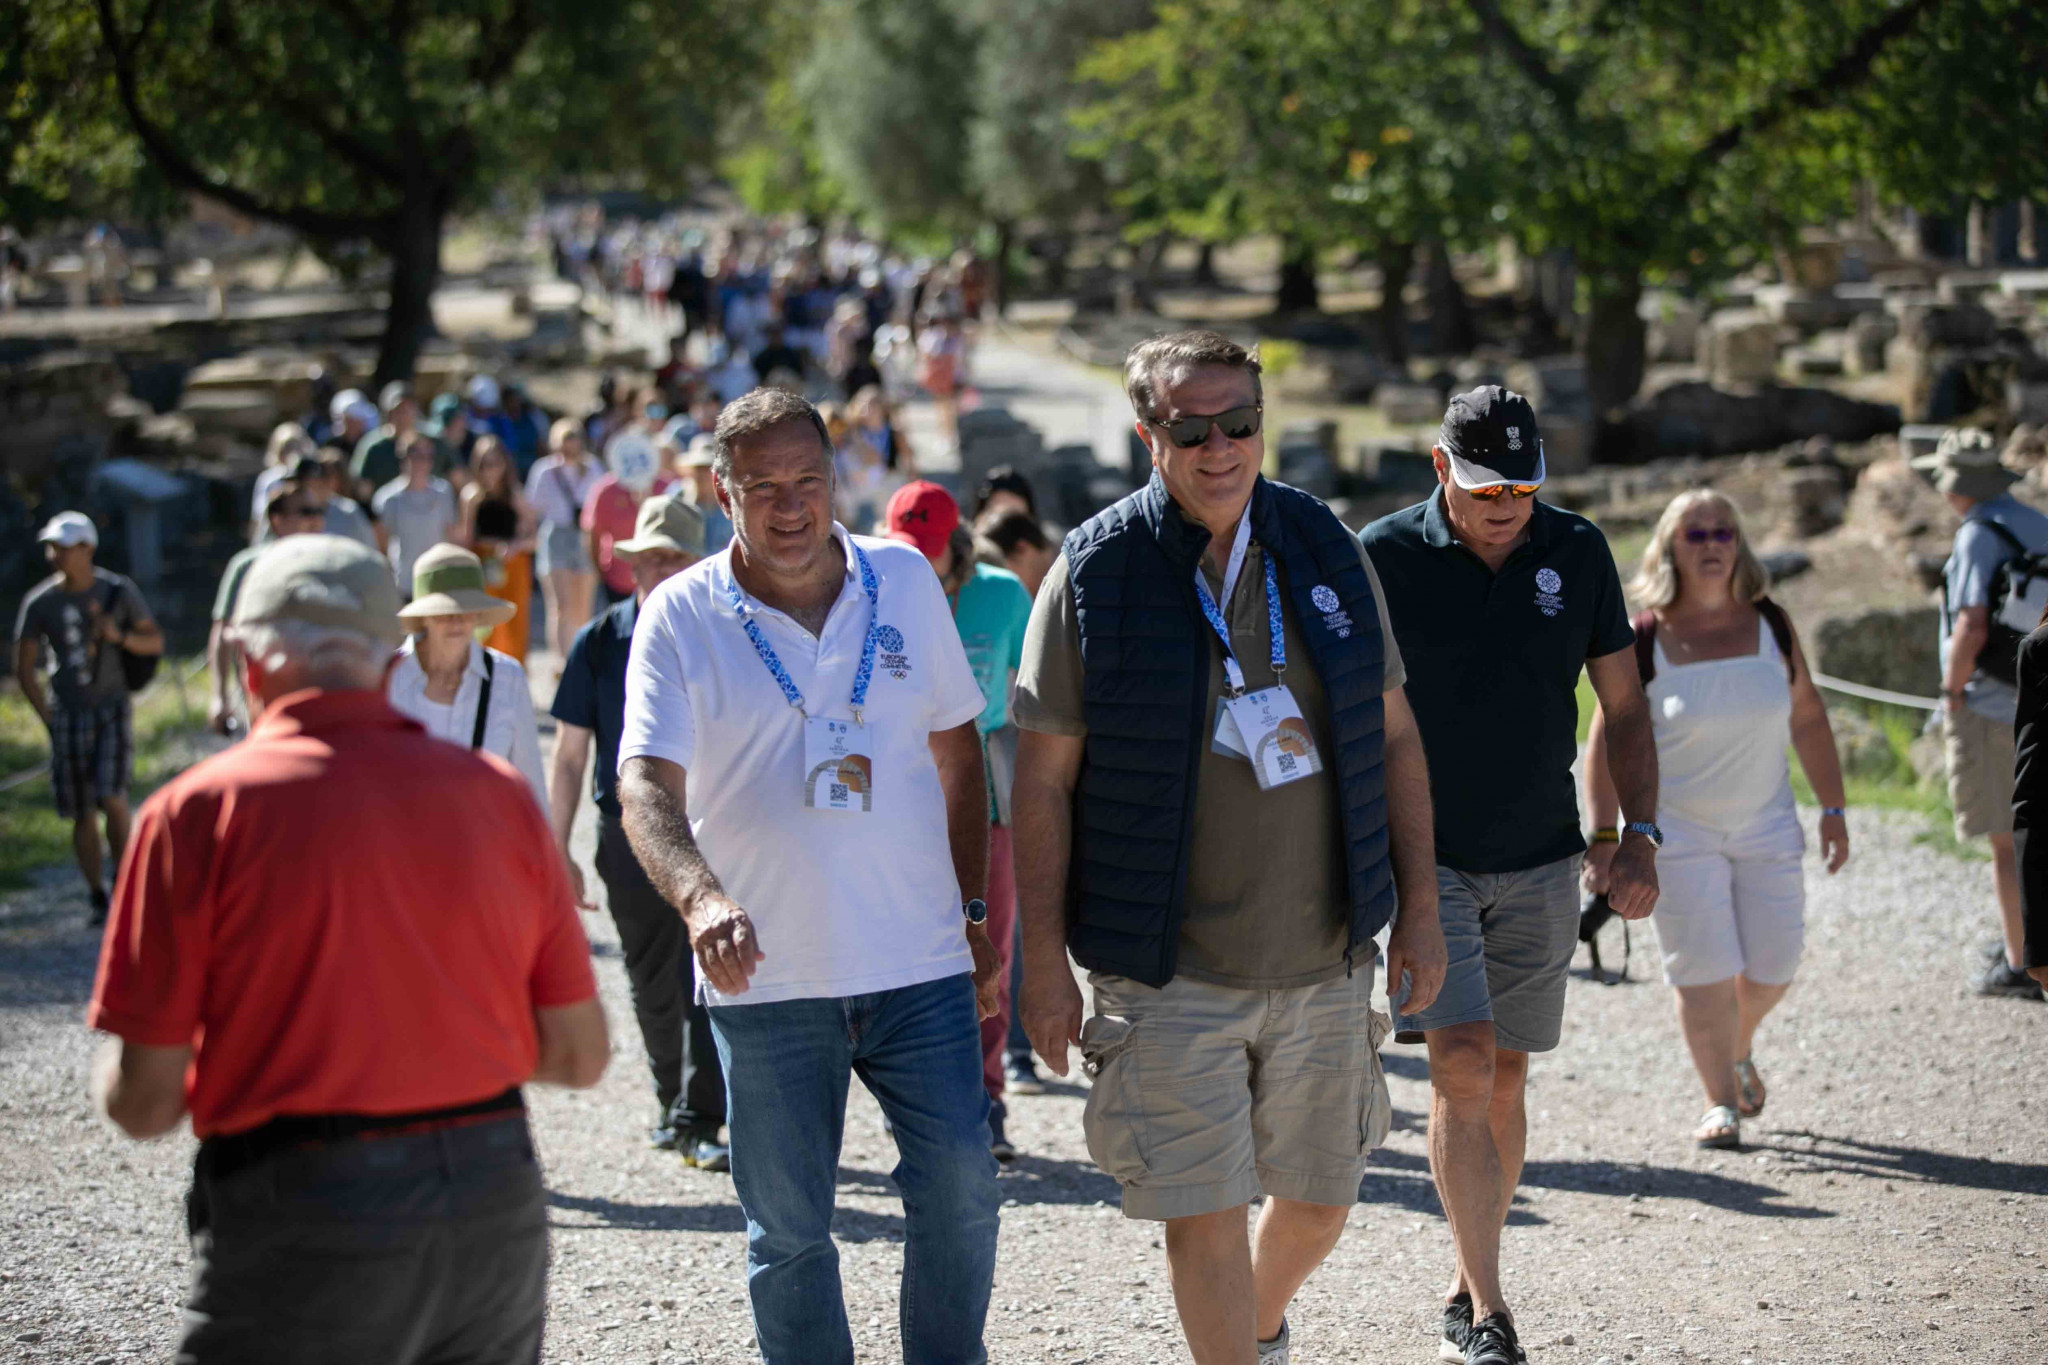 Greek EOC President Spyros Capralos helped to lead the tour in his home country ©EOC